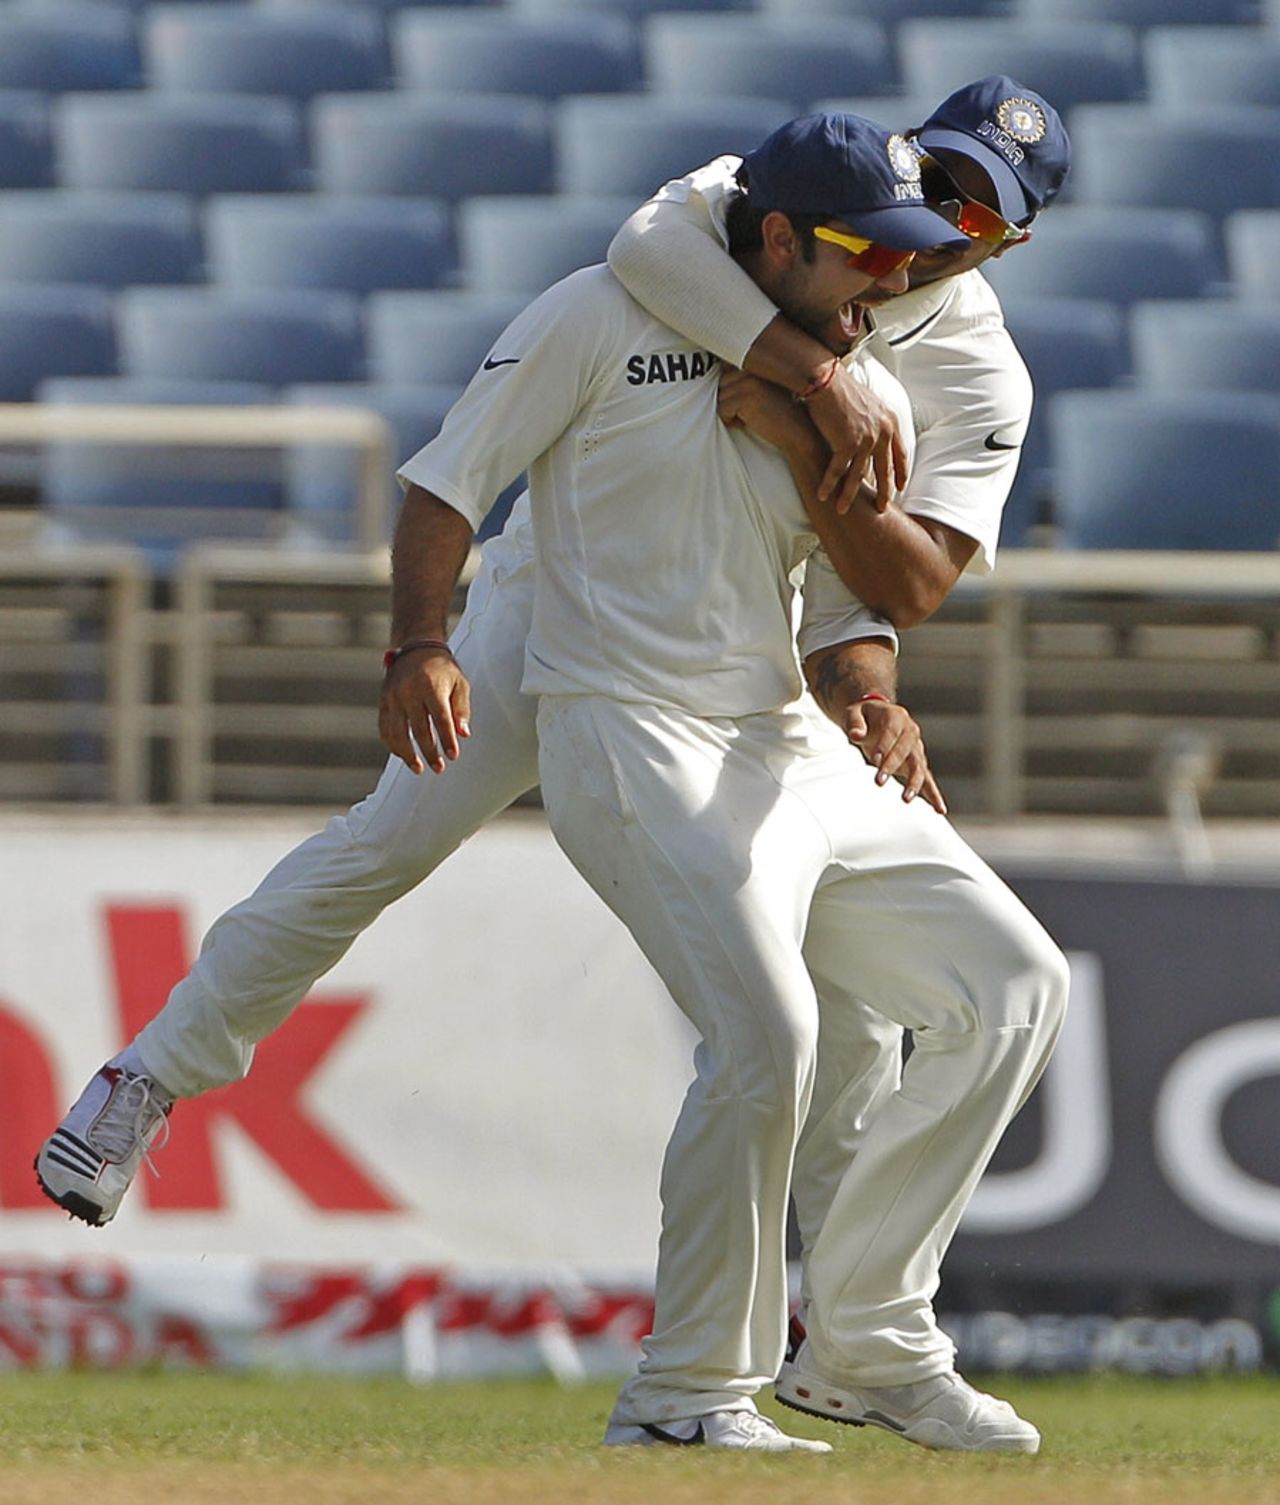 Virat Kohli is congratulated on a sharp catch, West Indies v India, 1st Test, Kingston, 3rd day, June 22, 2011